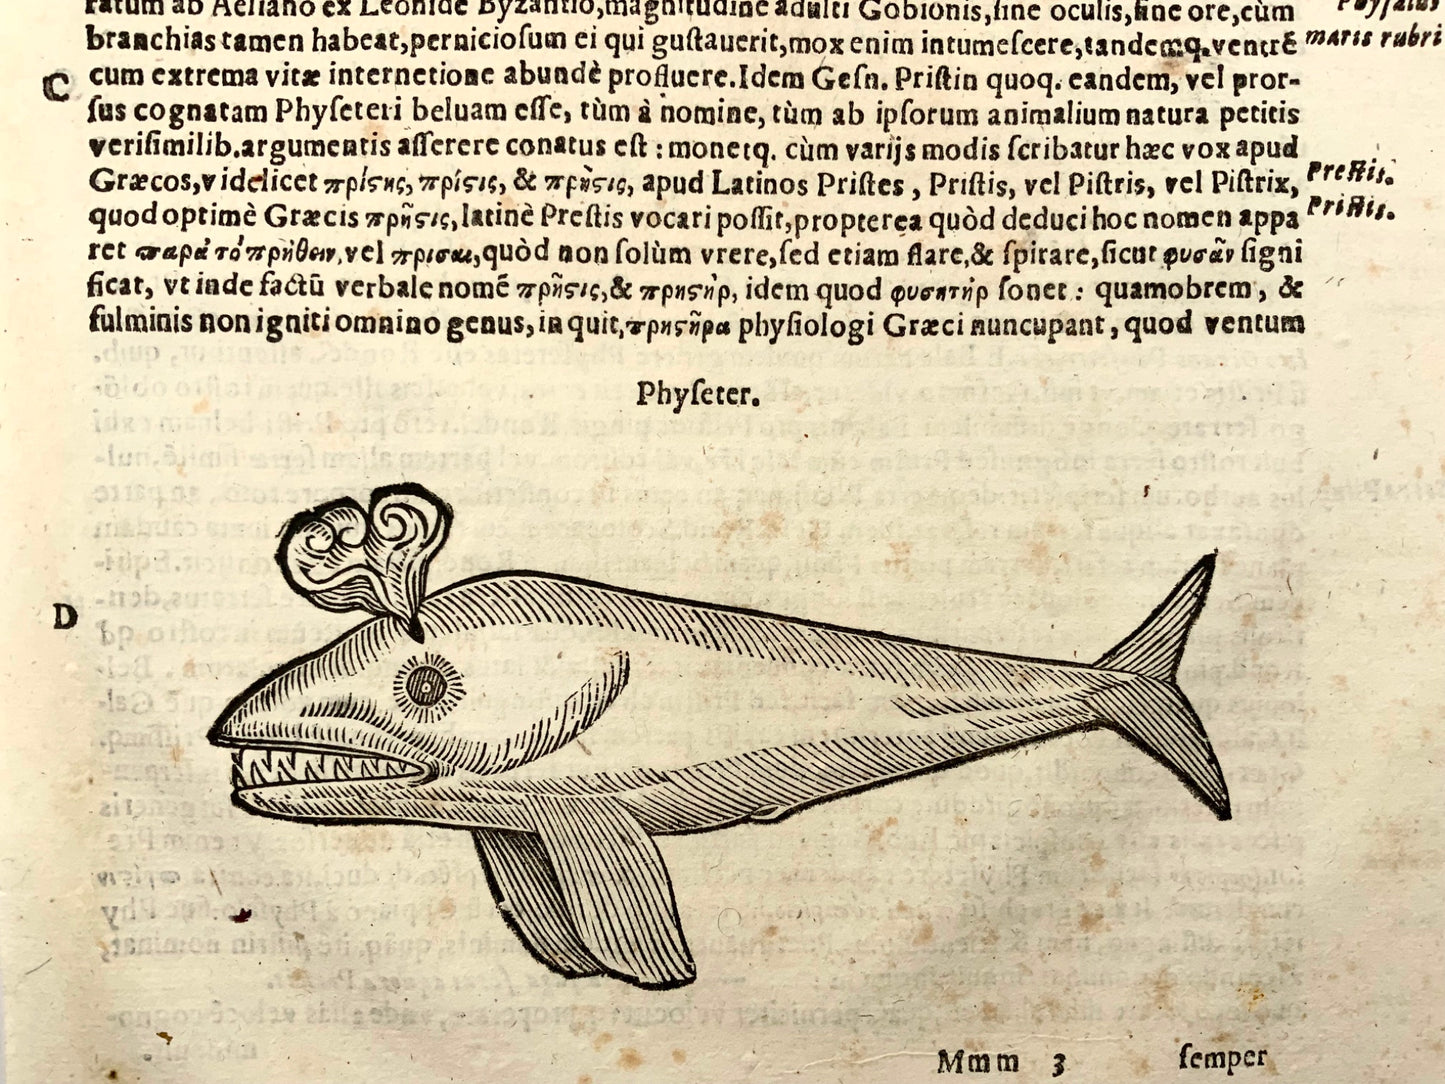 1638 Physeter Toothed Whale, Aldrovandi, large folio leaf with woodcut